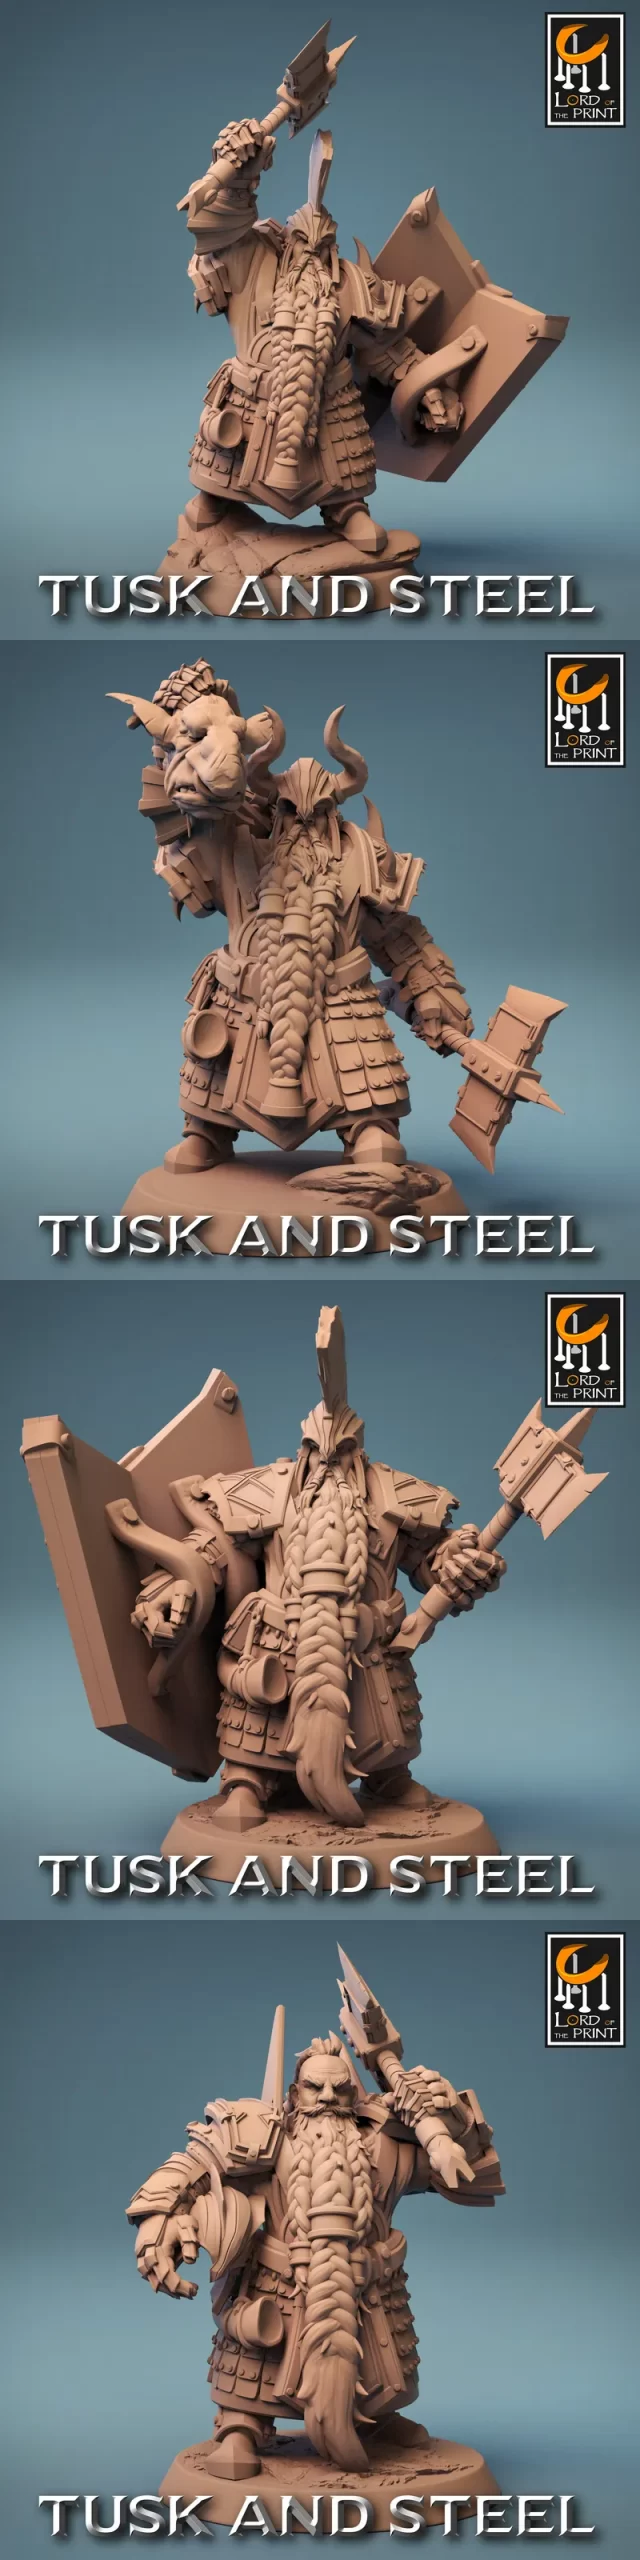 Lord of the Print - Tusk and Steel - Dwarf Soldiers - Axe